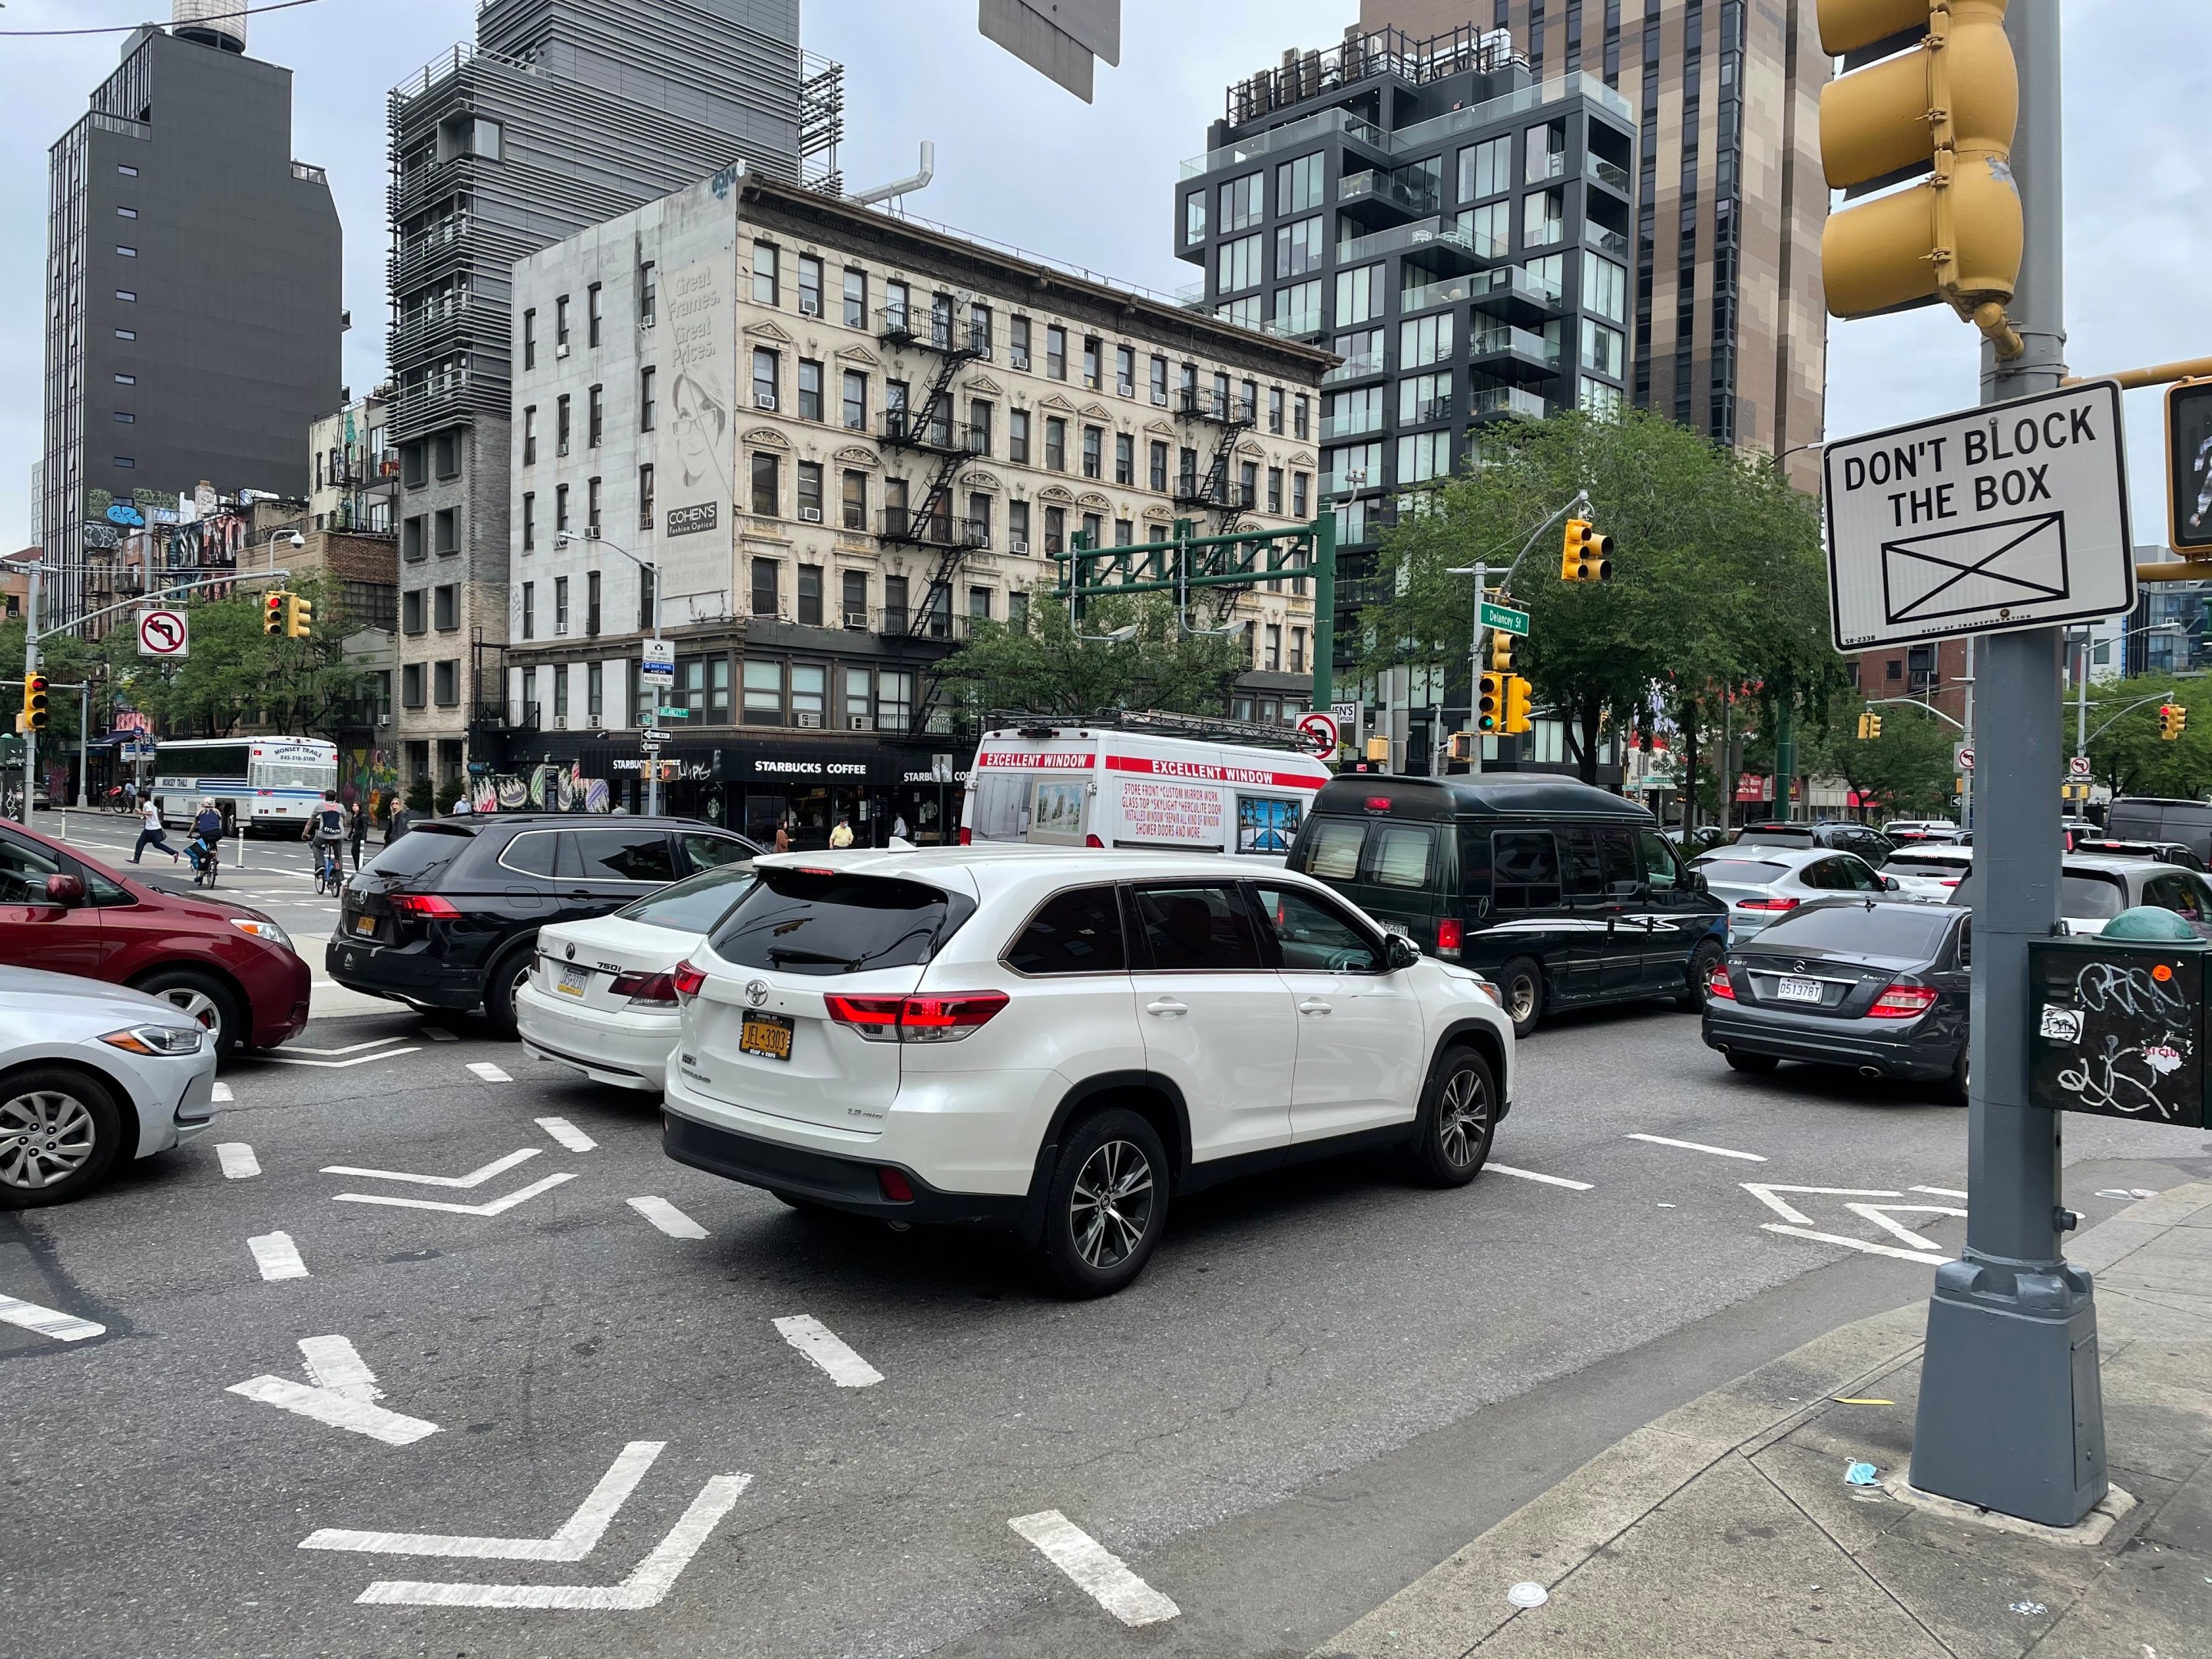 Cars block the intersection in a traffic jam on Delancey Street.